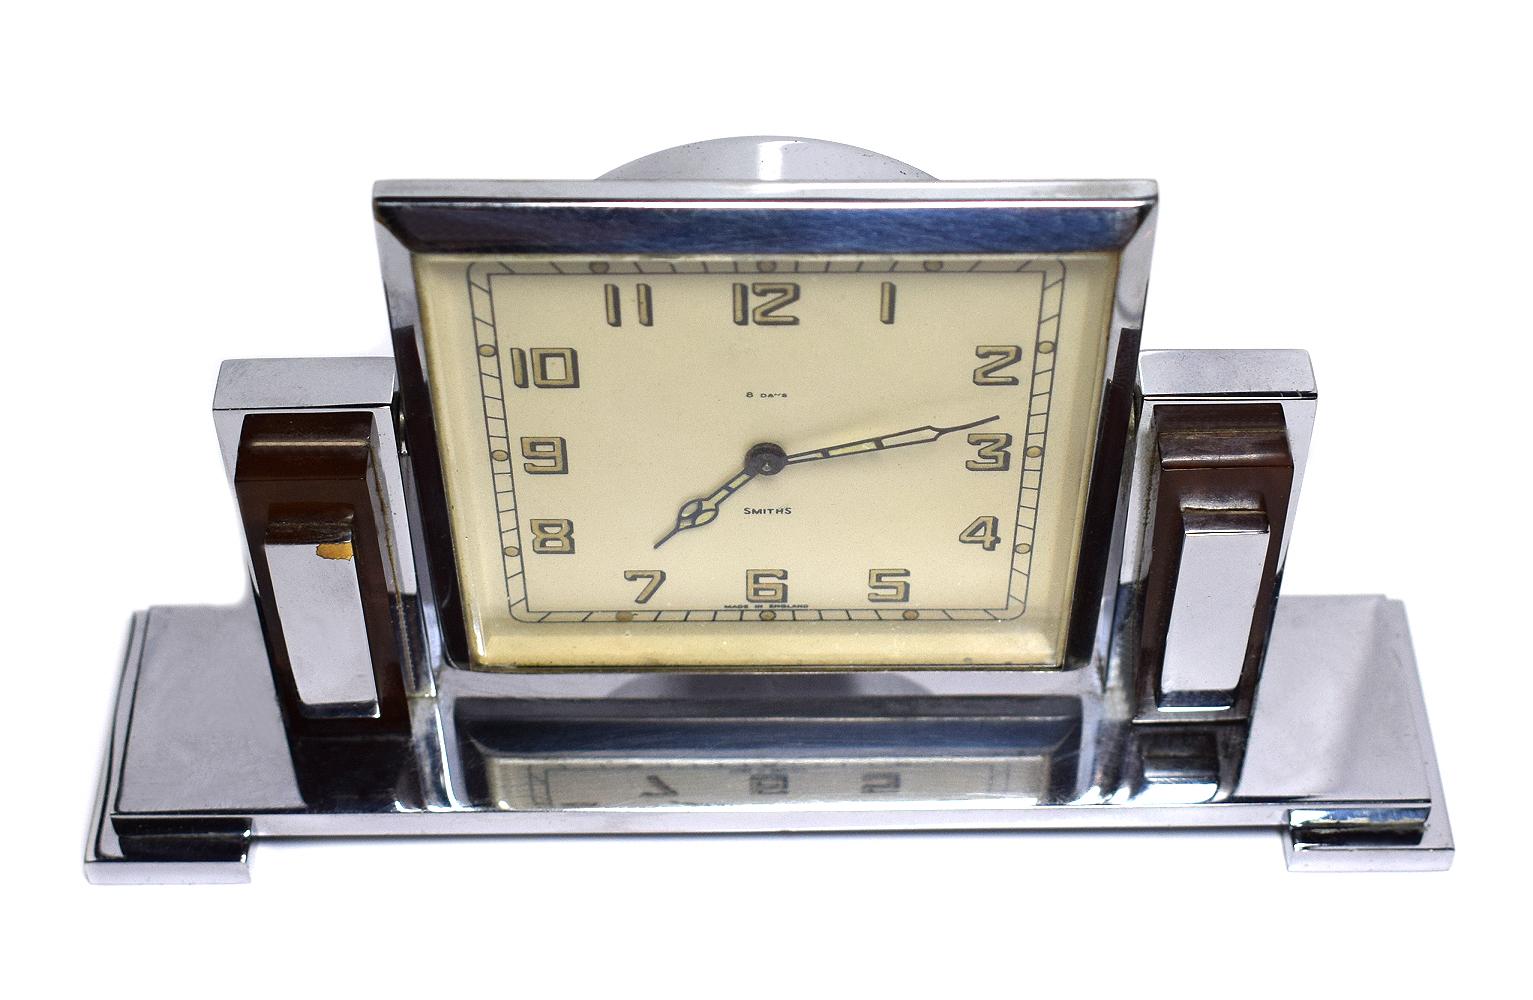 For your consideration is this very stylish 1930s Art Deco clock by Smiths. Quite a weighty clock we have to say considering it's size and in great condition. The chrome is bright and crisp and free from nasty scratches, tarnishing etc. Either side